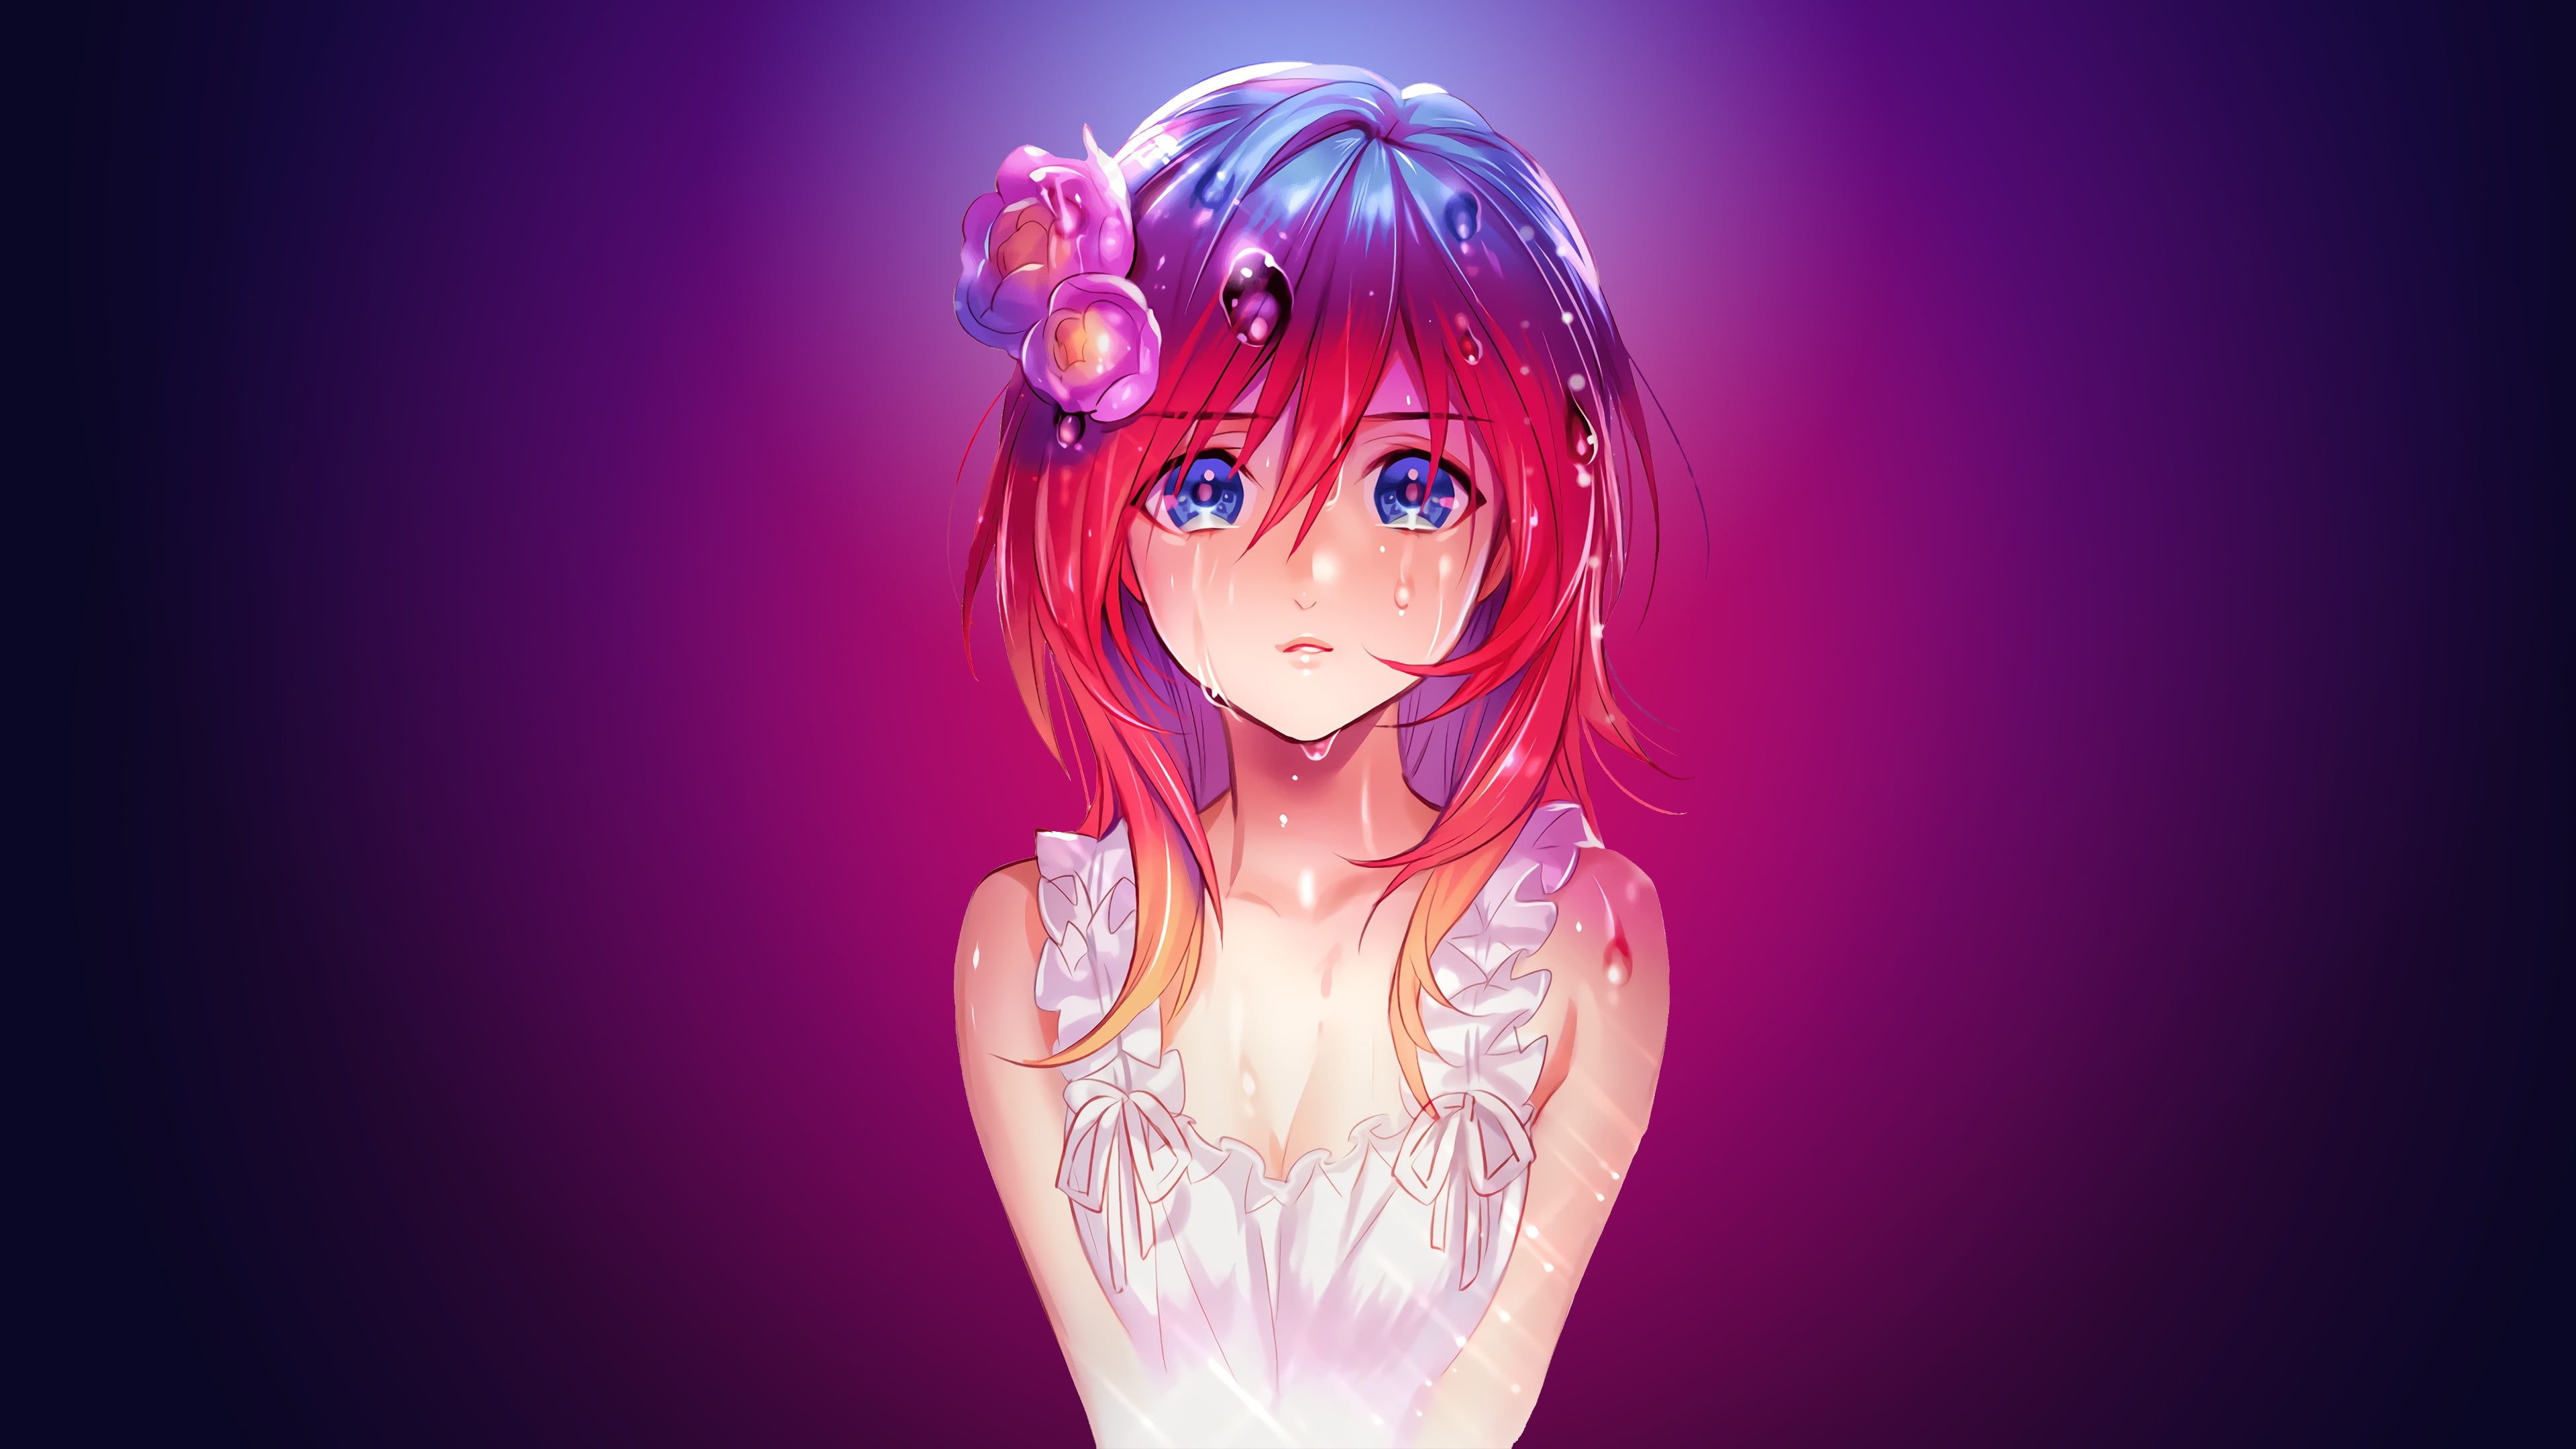 anime girl red hair character by chiich4n on DeviantArt